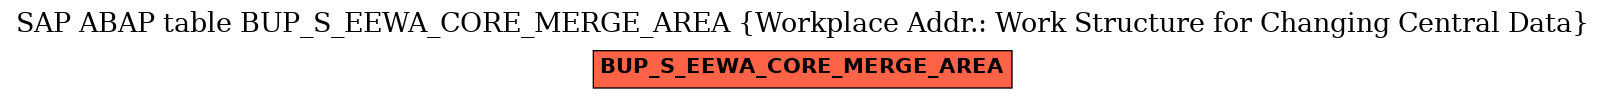 E-R Diagram for table BUP_S_EEWA_CORE_MERGE_AREA (Workplace Addr.: Work Structure for Changing Central Data)